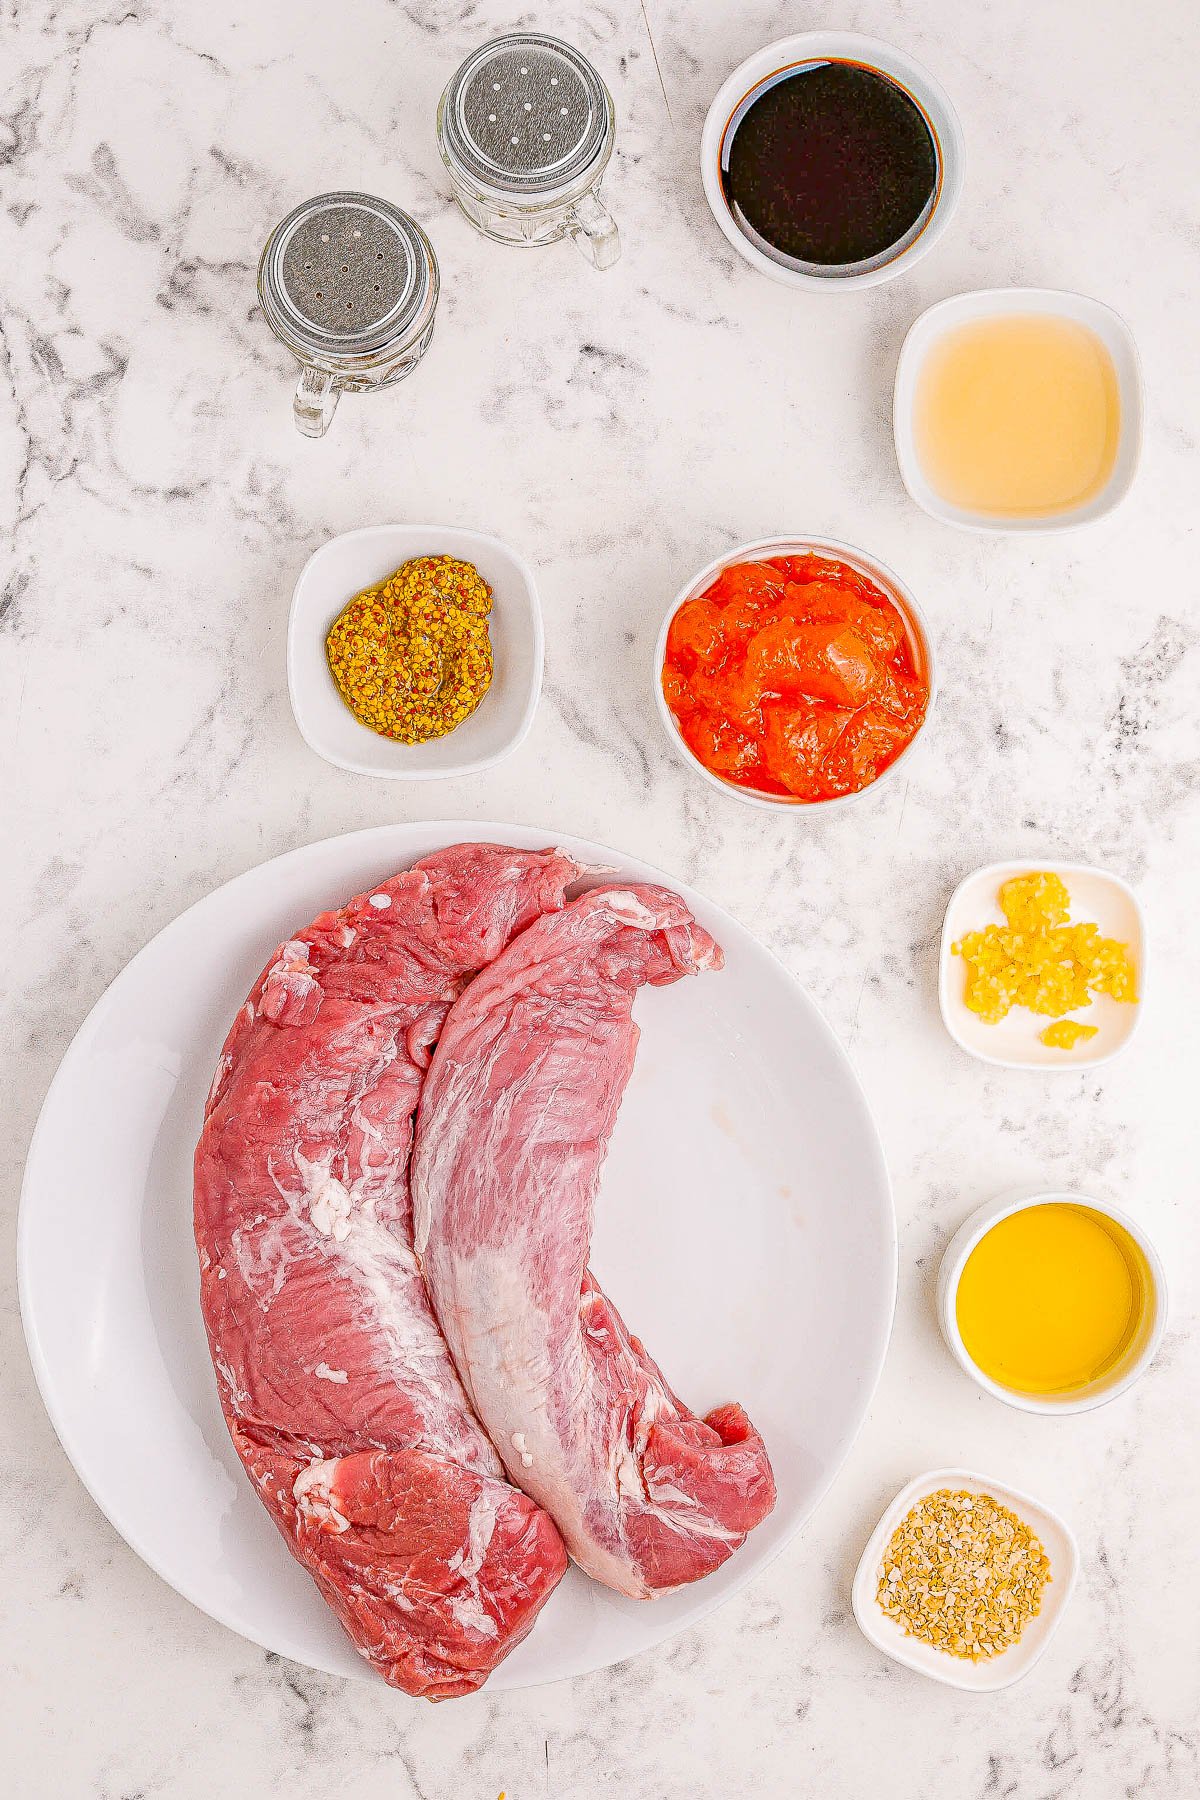 Ingredients for a beef recipe laid out on a marble countertop, including a cut of beef, various seasonings, and sauces.